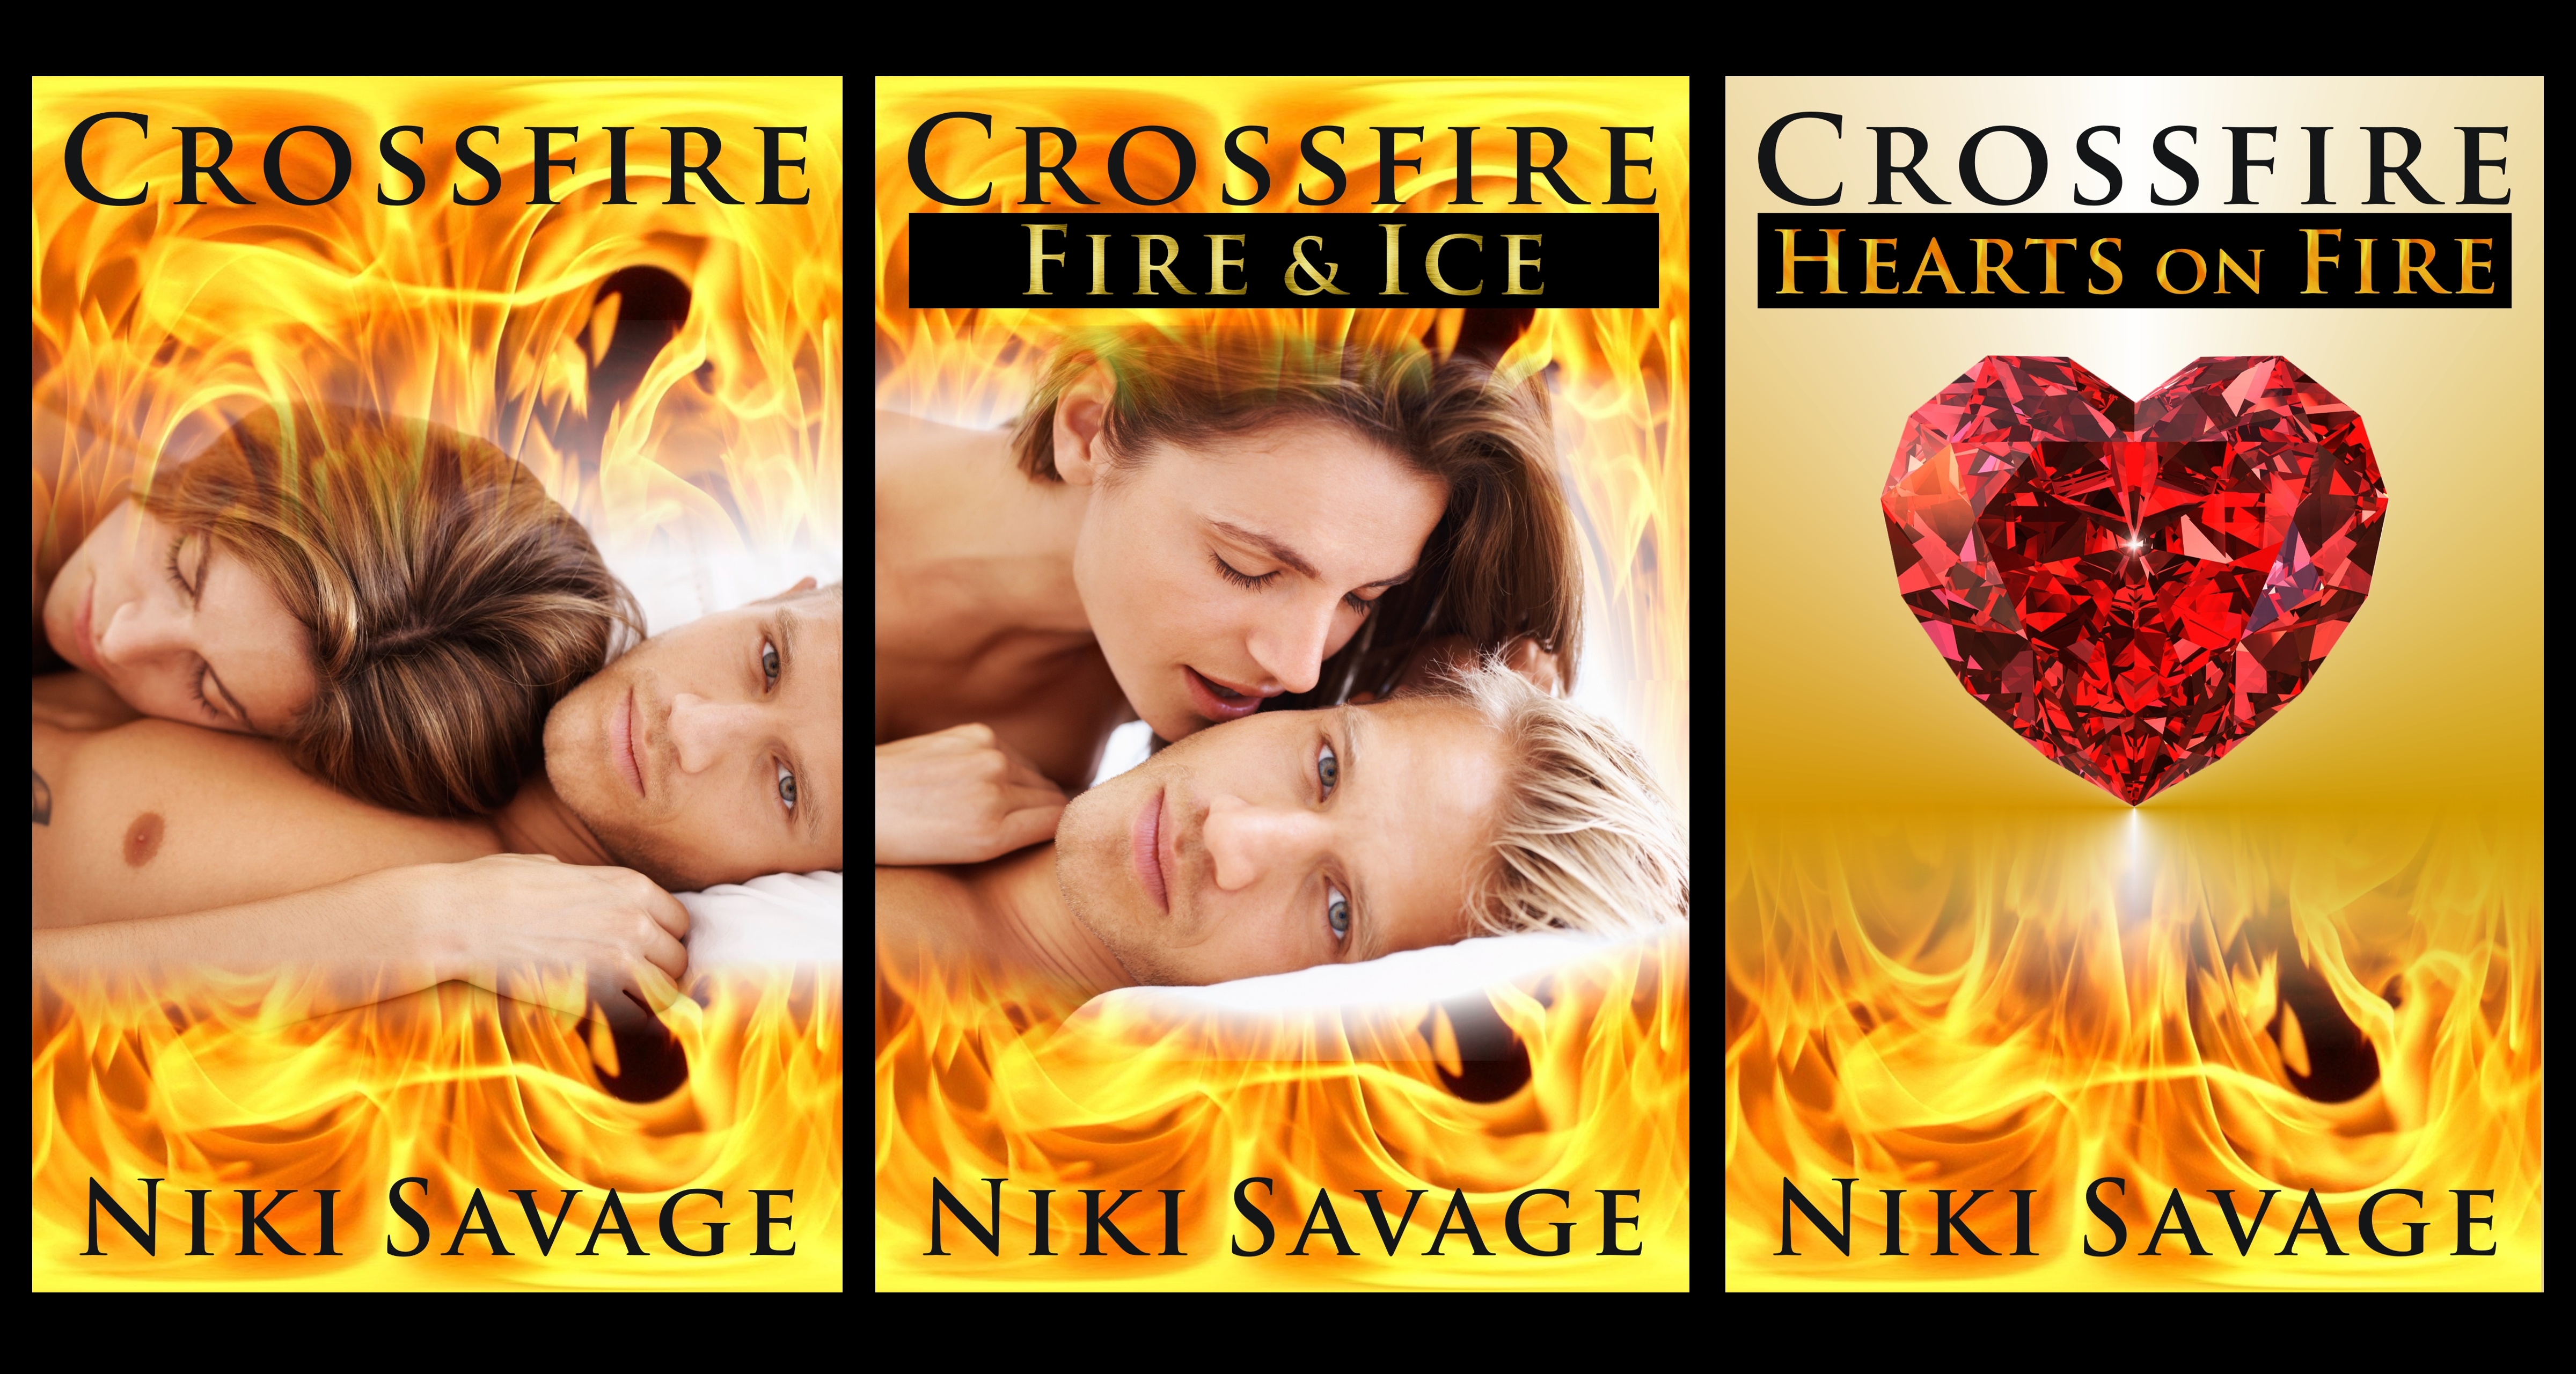 New crossfire trilogy covers 27 May 2013